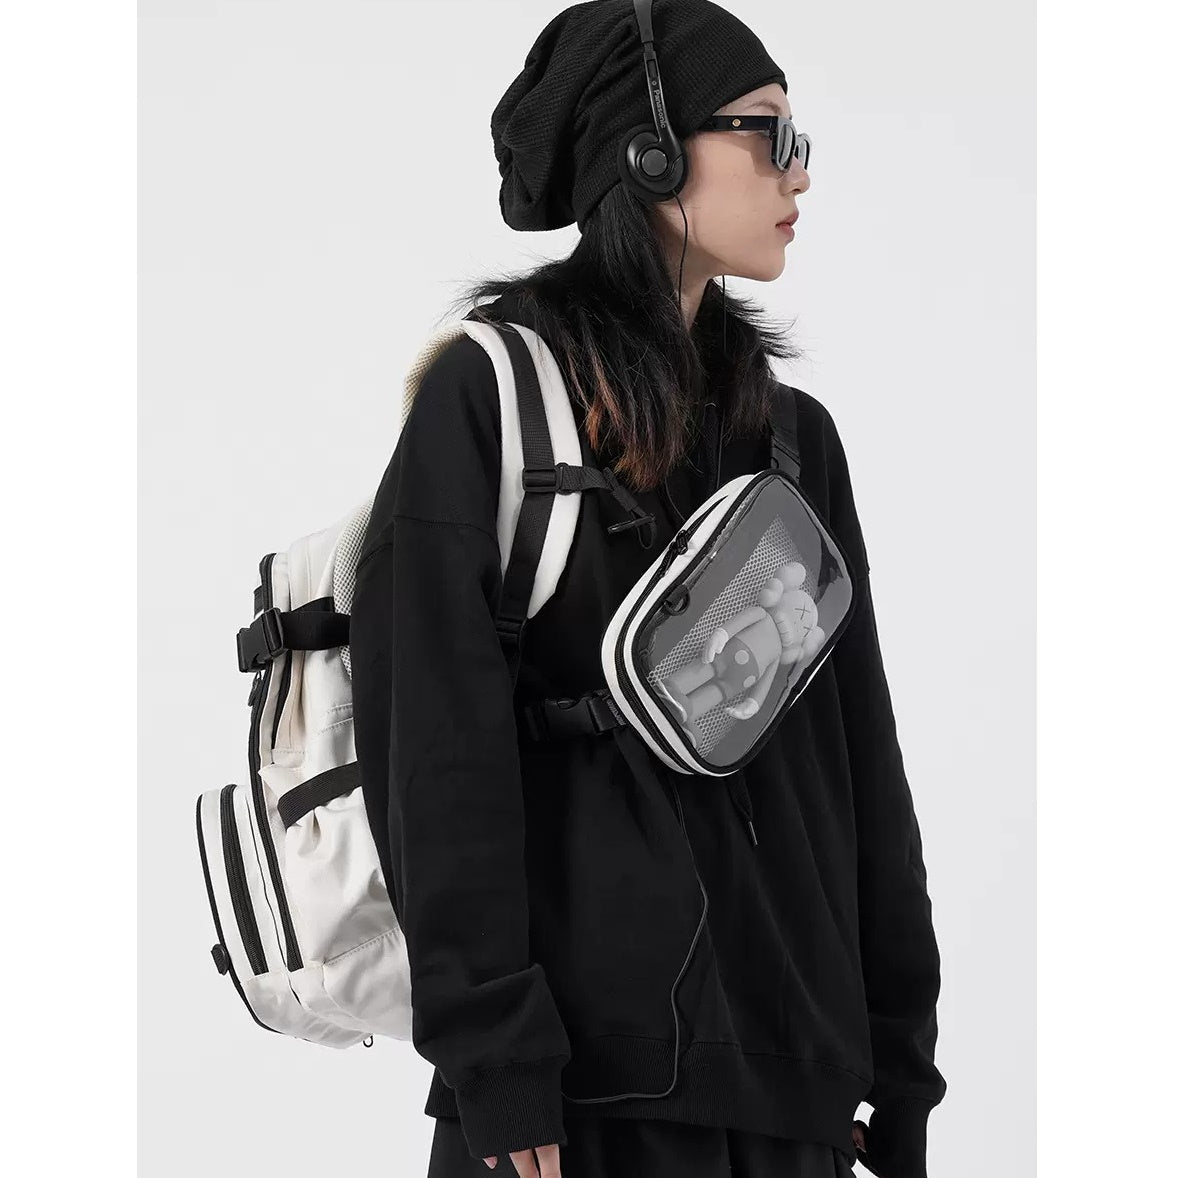 clear pocket pain large backpack BA019